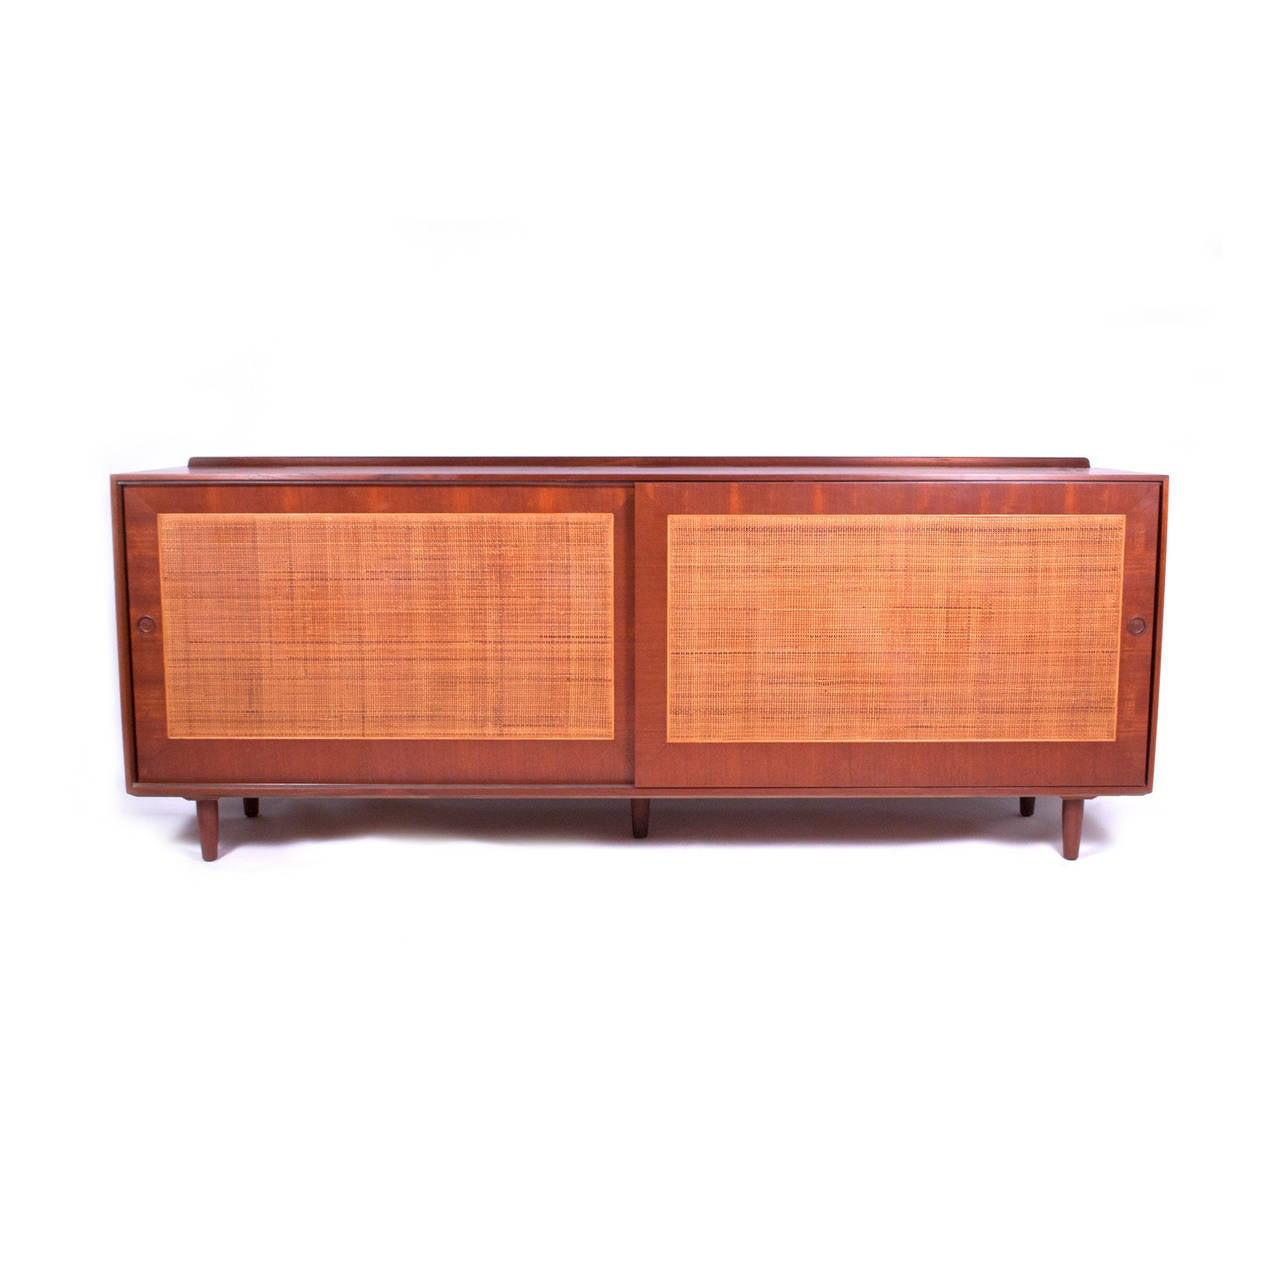 Teak cane doors freestanding sideboard, two sliding doors, three drawers and shelving on a five cone legs, this model not made in Denmark only US.